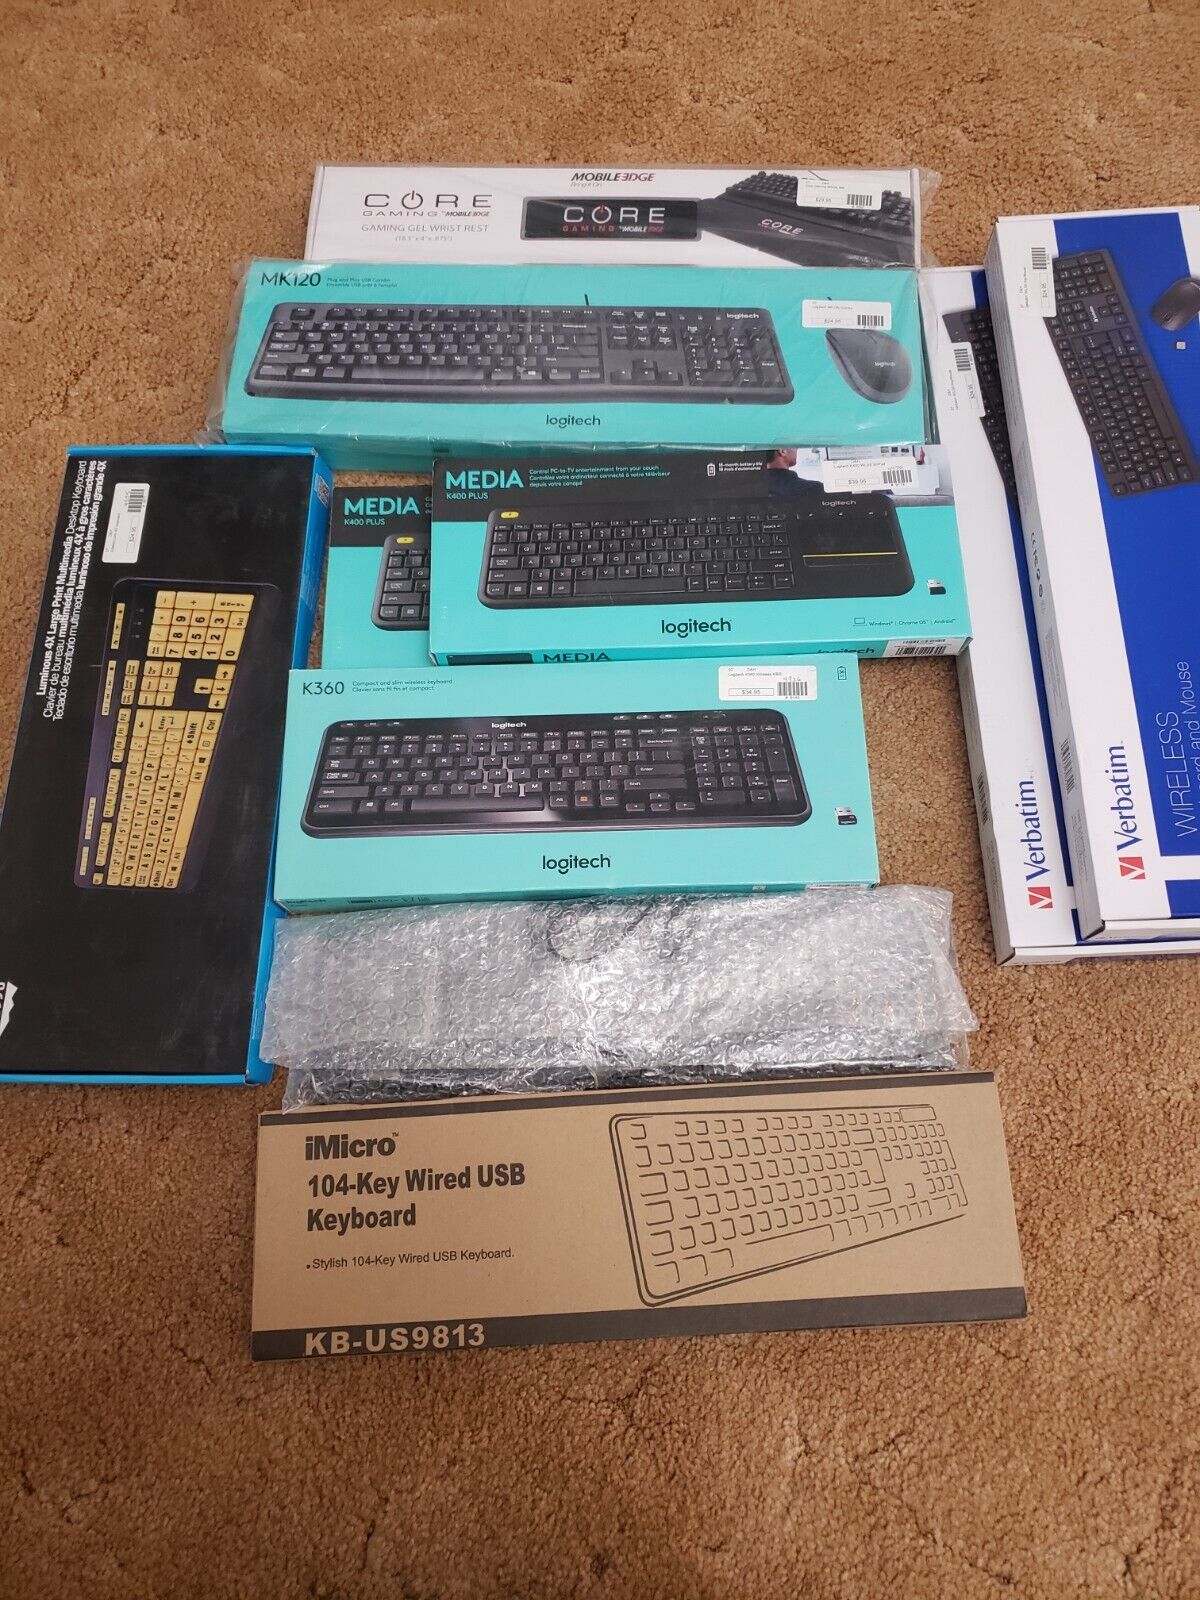 Bundle of 9 Brand new Keyboards (4 of the Logitech) and 1 Gaming Wrist Rest